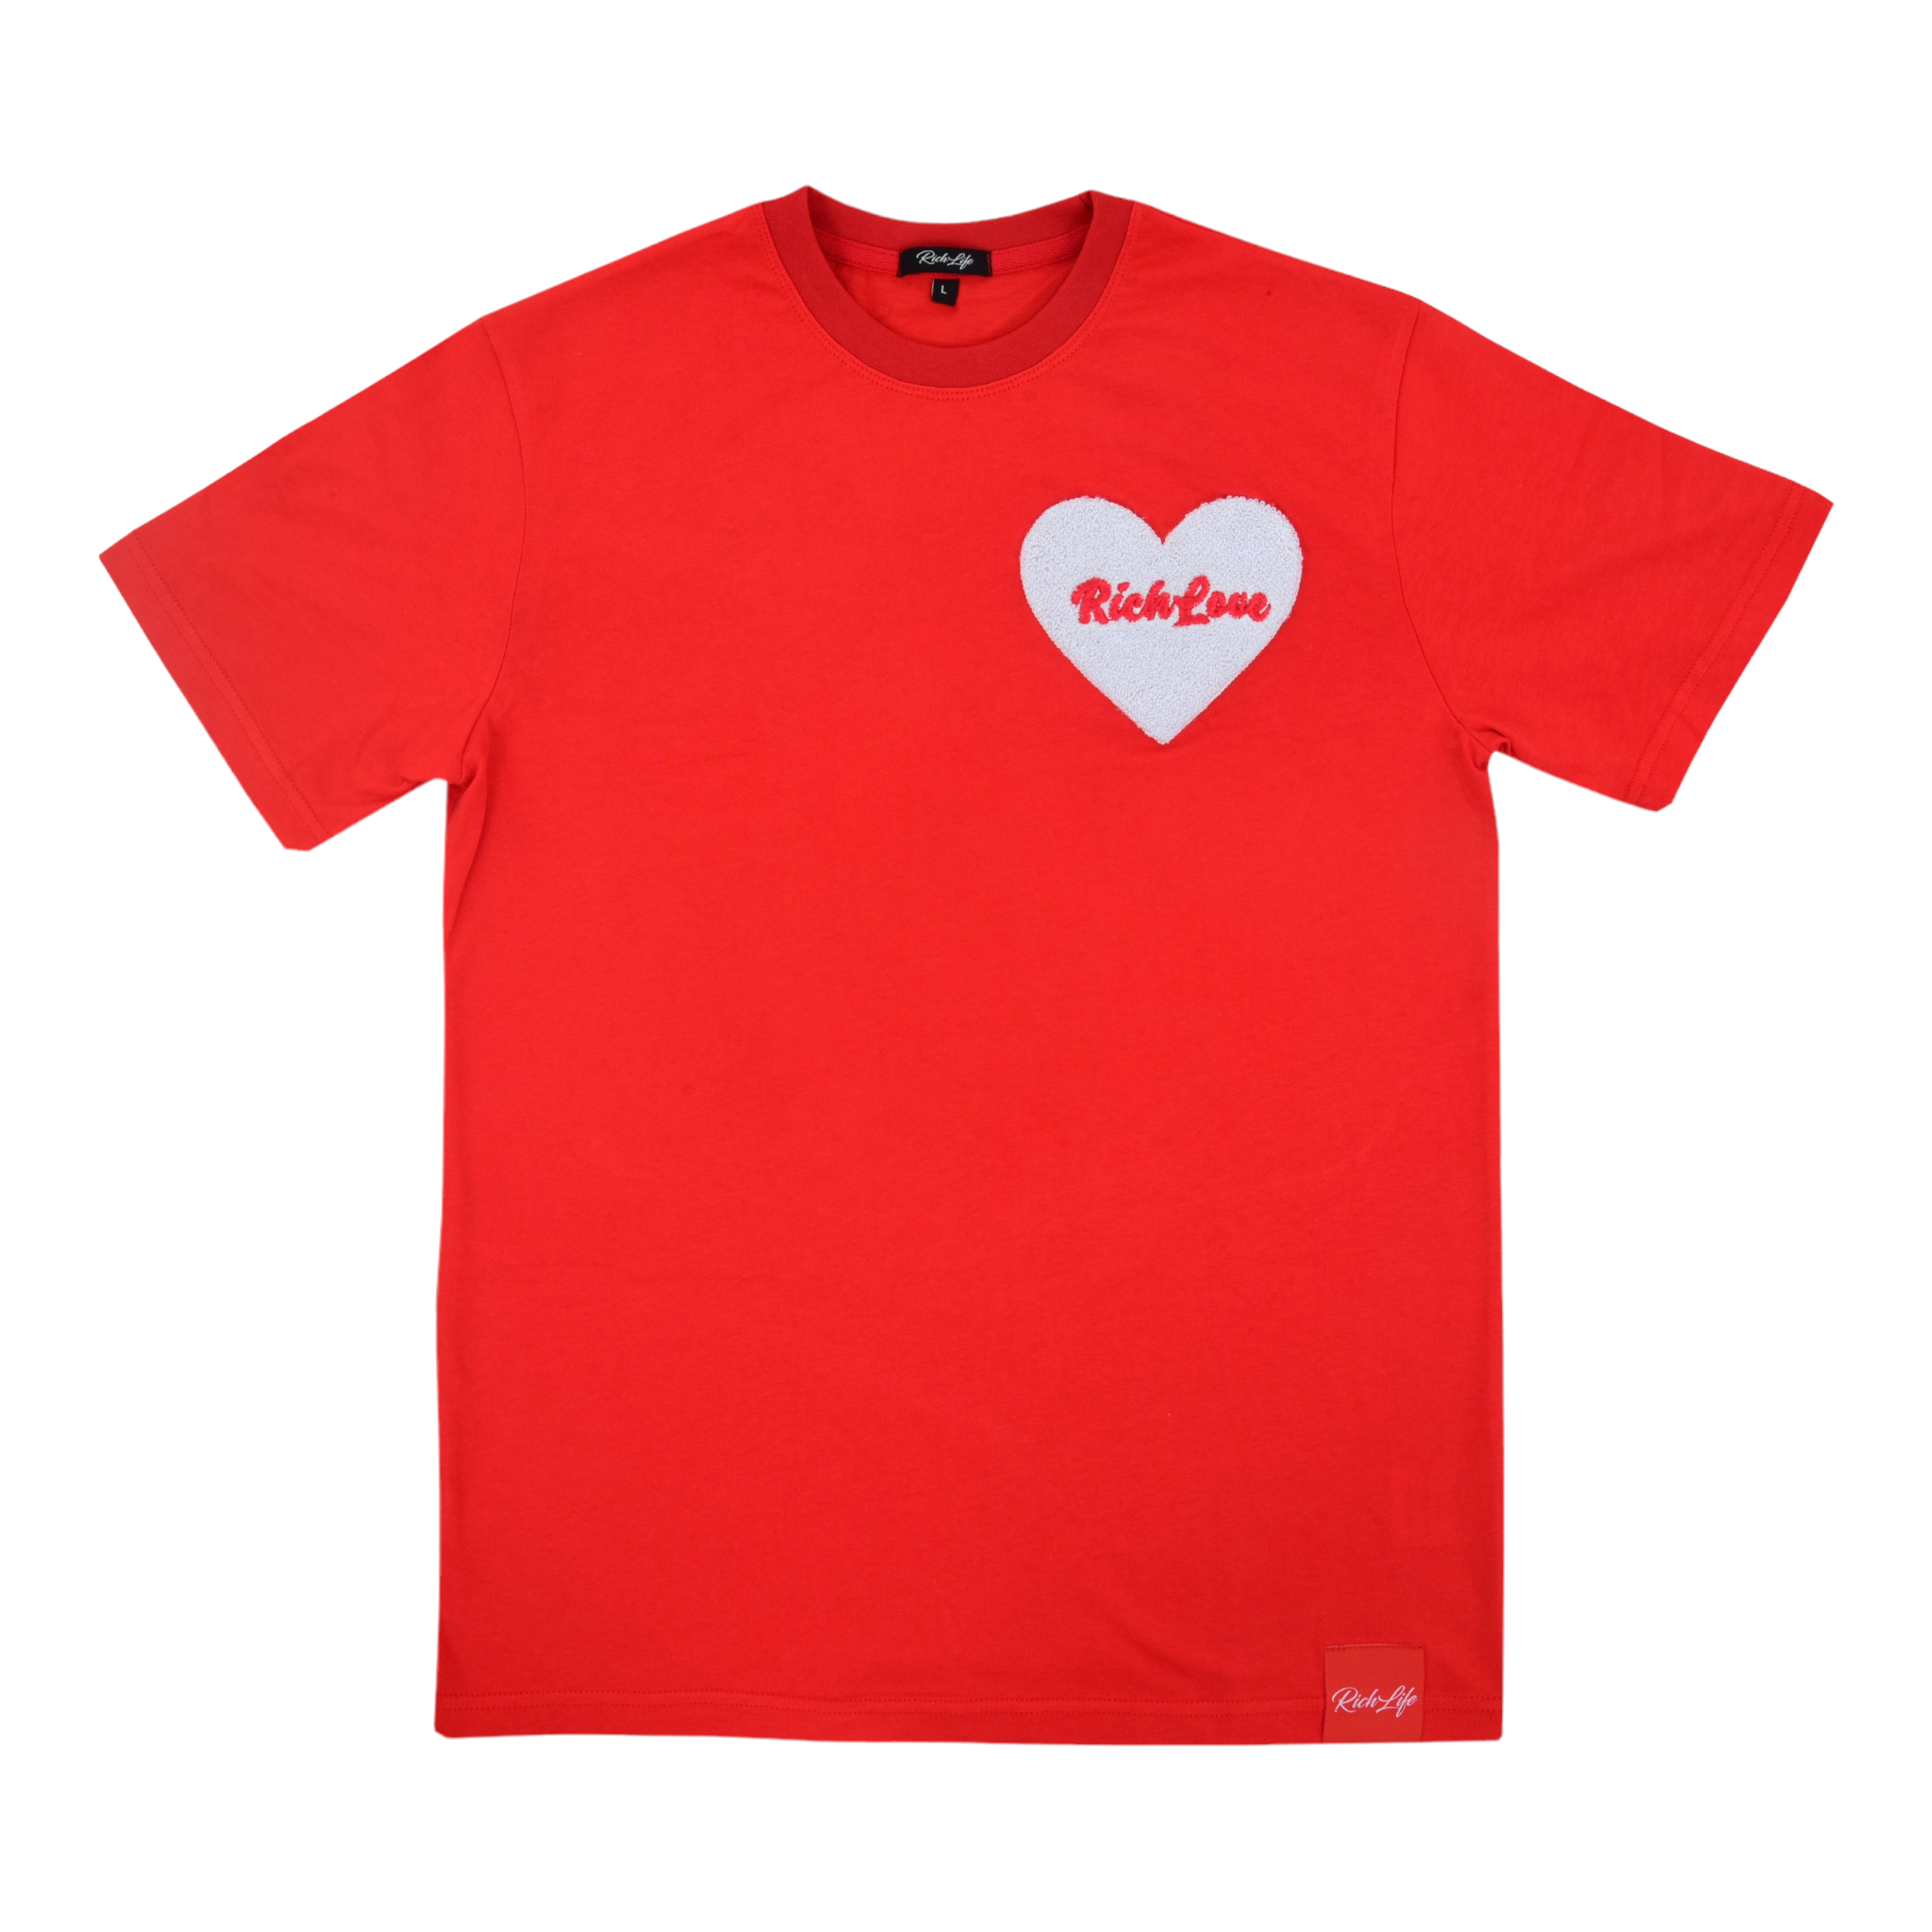 Rich Life "Rich Love" Limited Edition T-Shirts